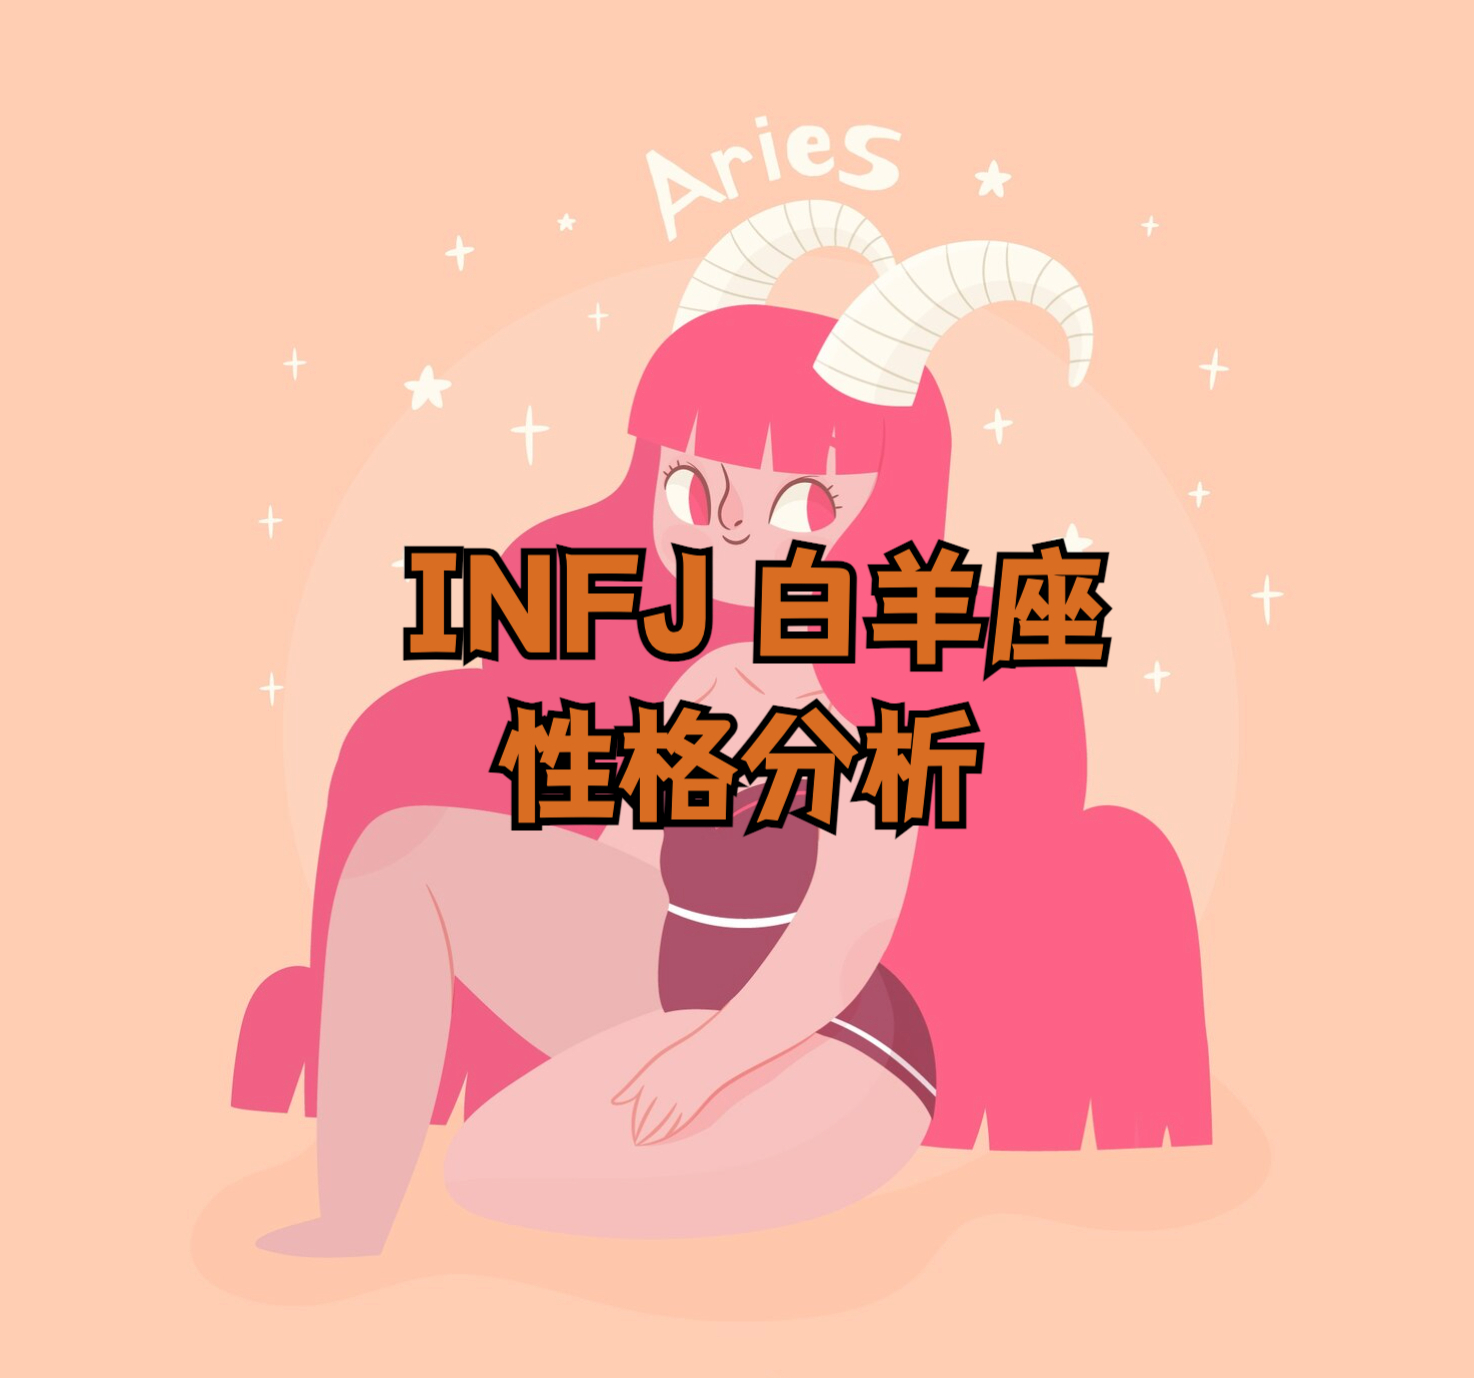 MBTI and zodiac signs: Analysis of INFJ Aries personality traits